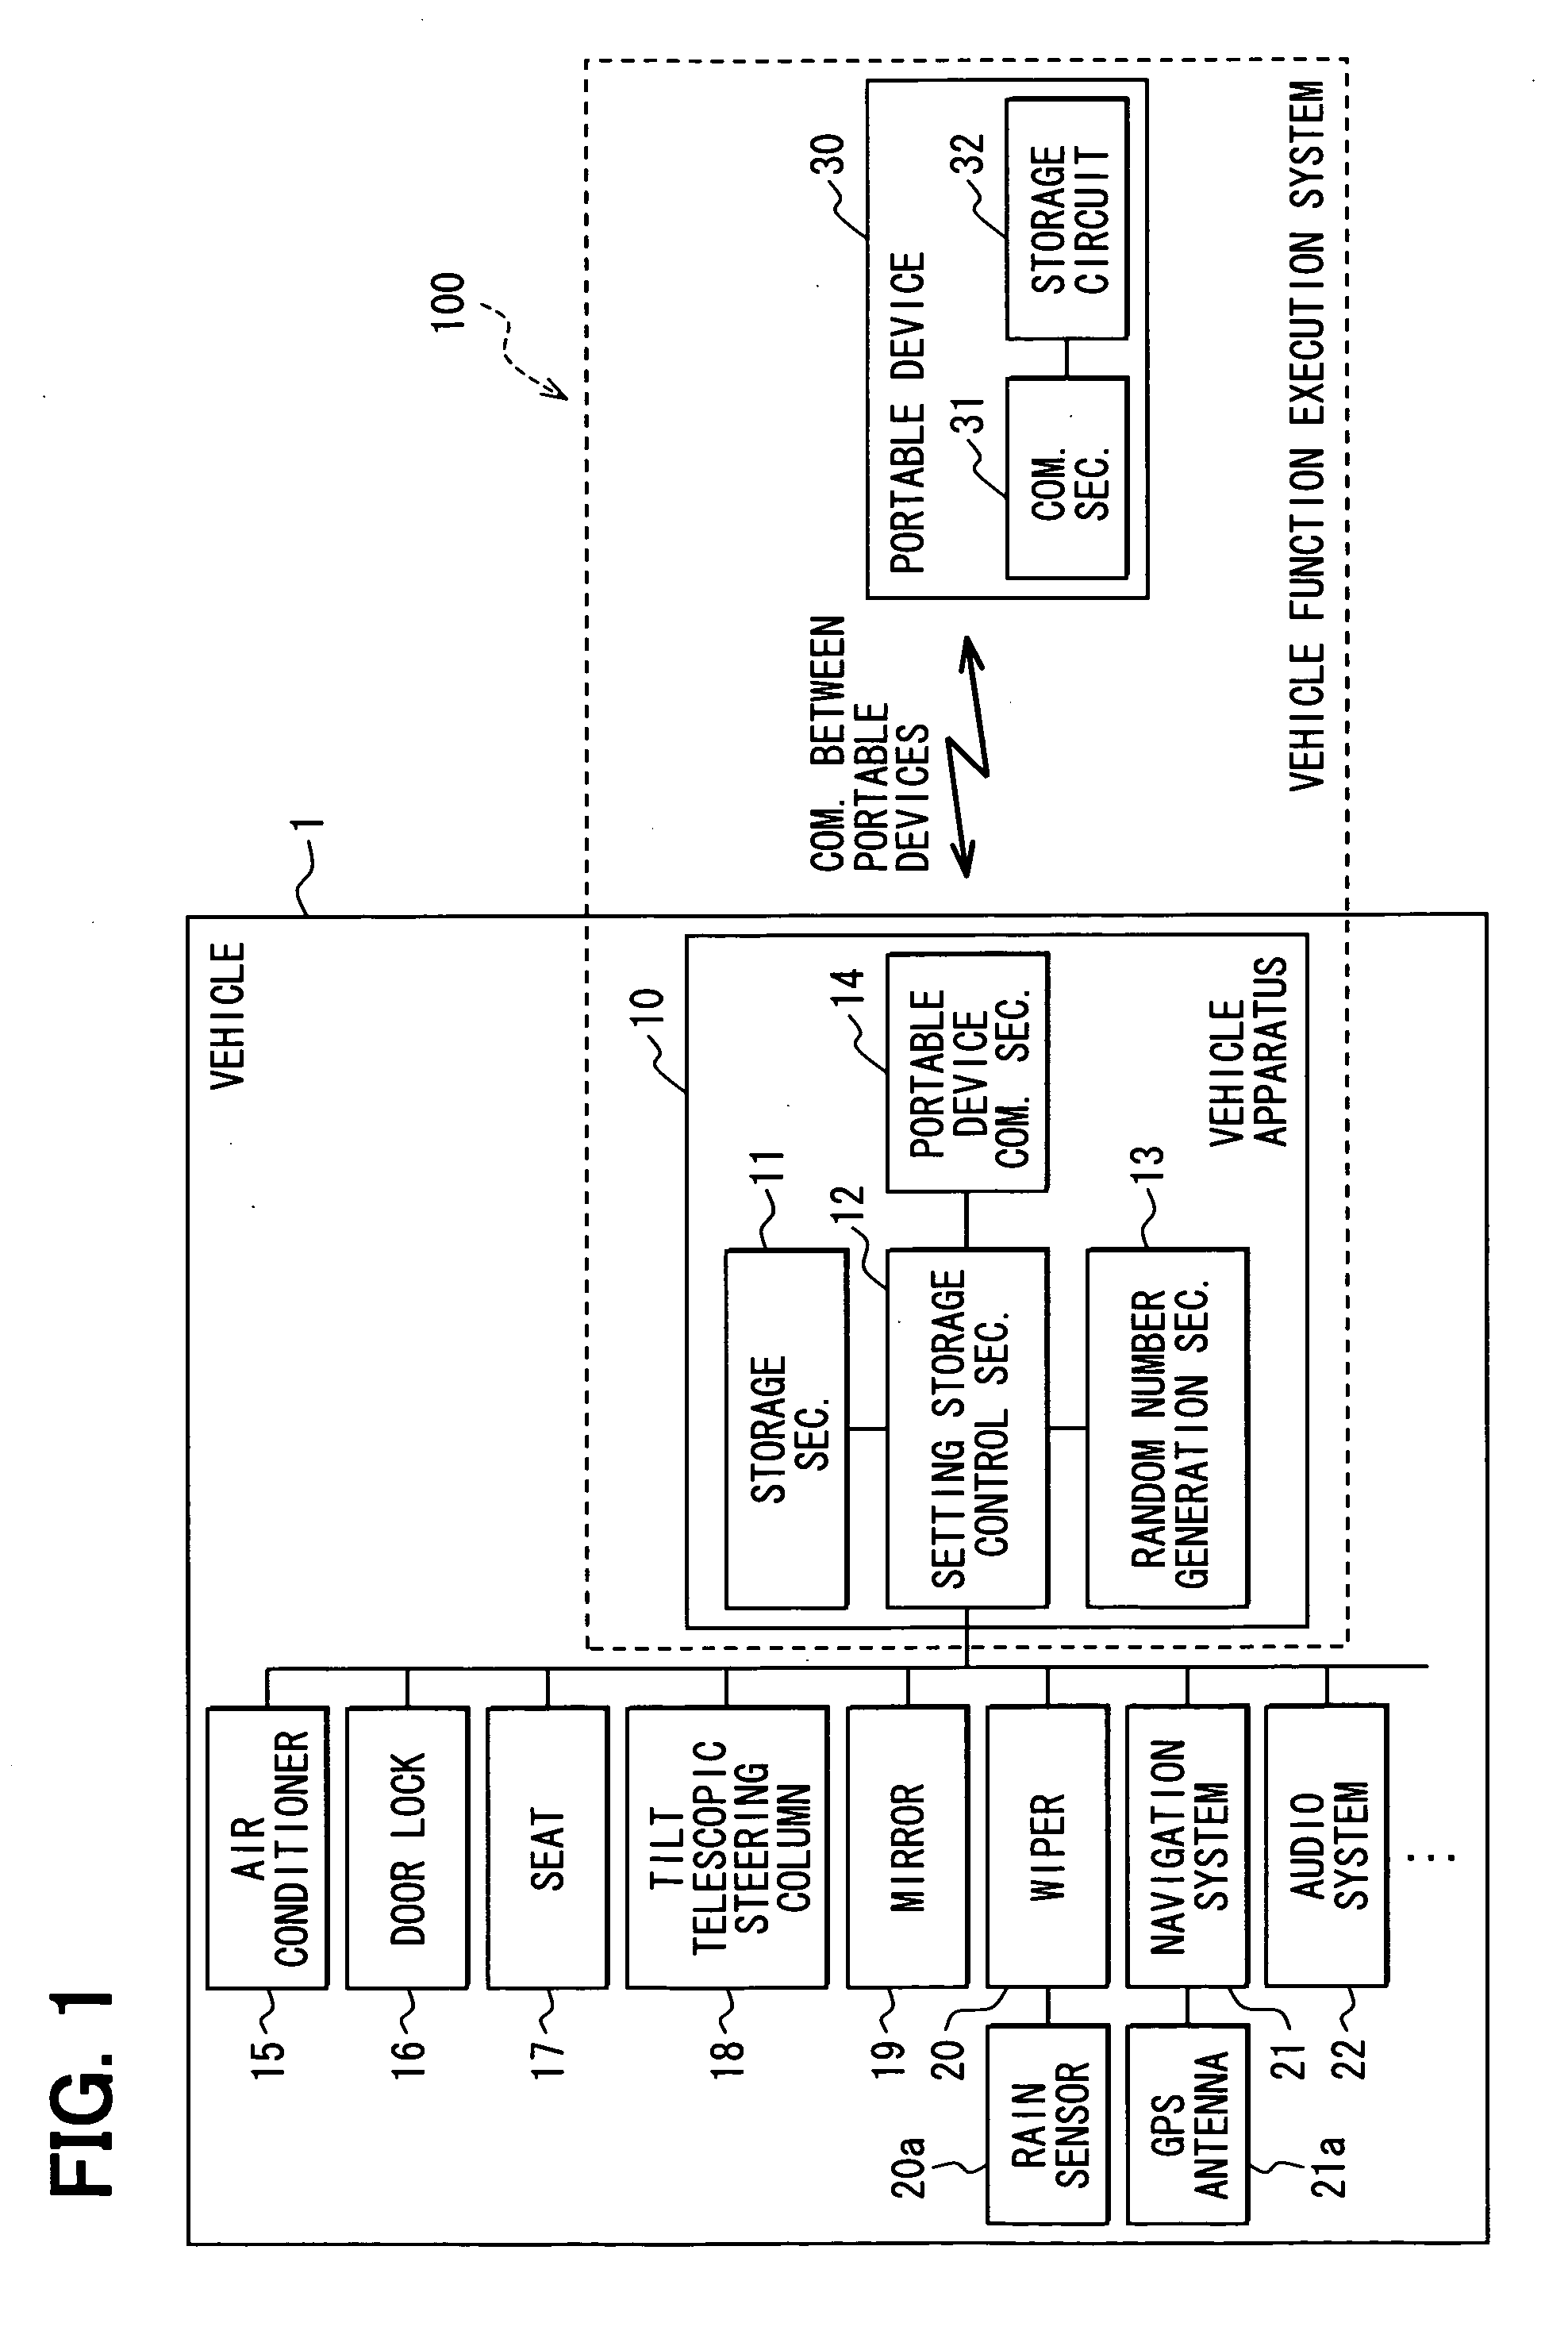 Vehicle function execution system, vehicle apparatus, portable device, recording medium, and information center